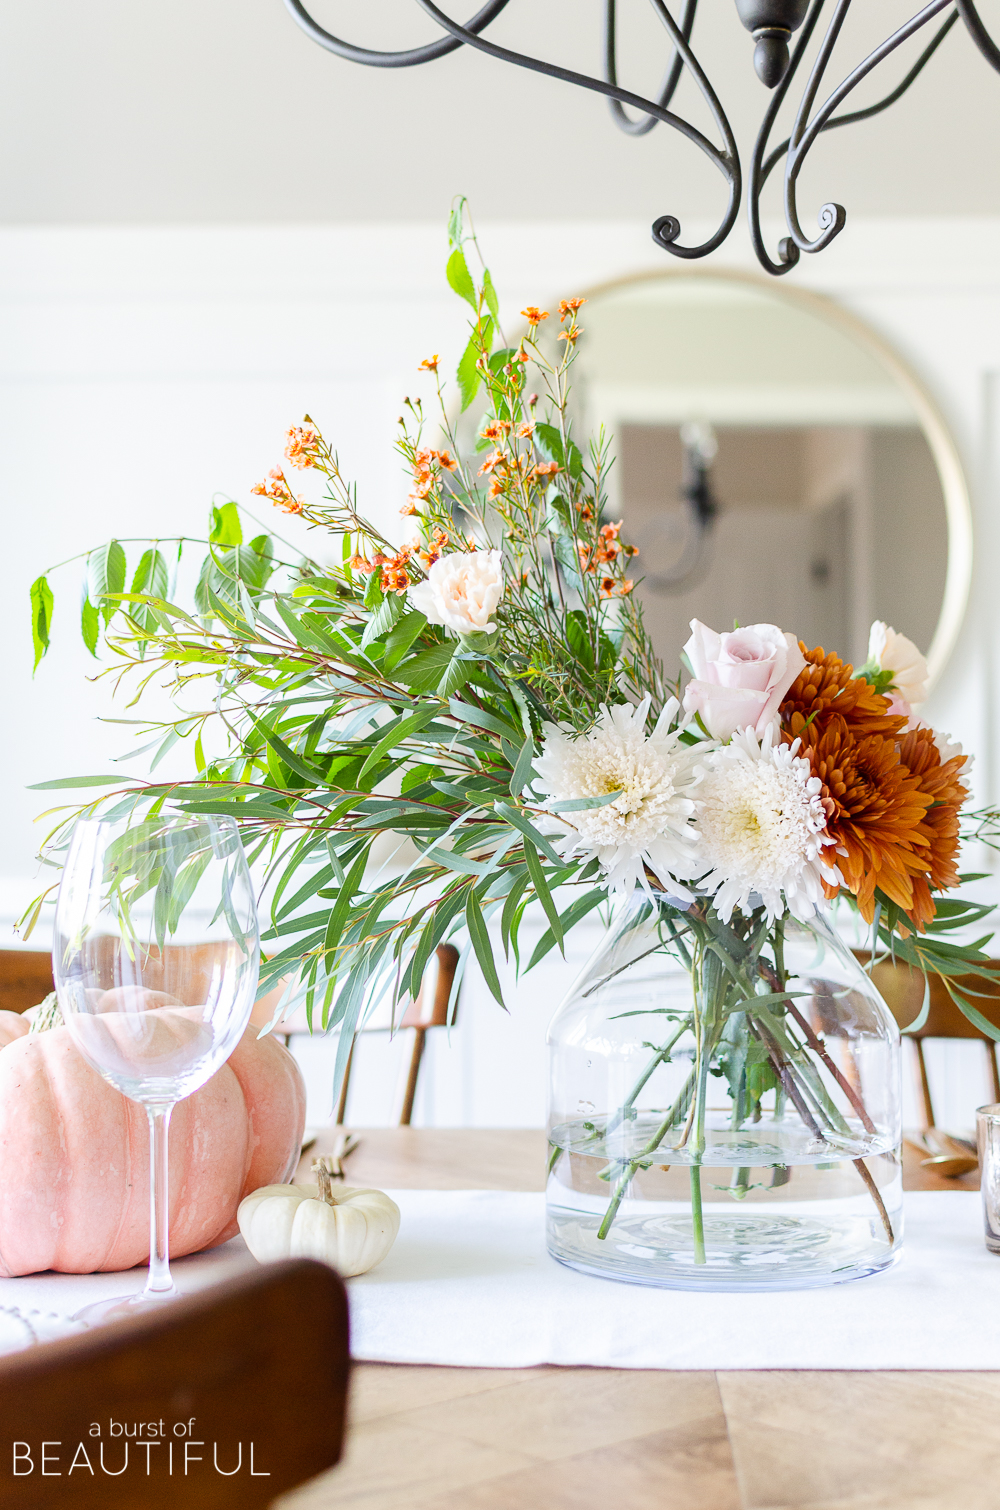 Find inspiration for entertaining this fall season with 16 festive fall tablescapes, including a simple fall table setting in traditional autumn colors. 